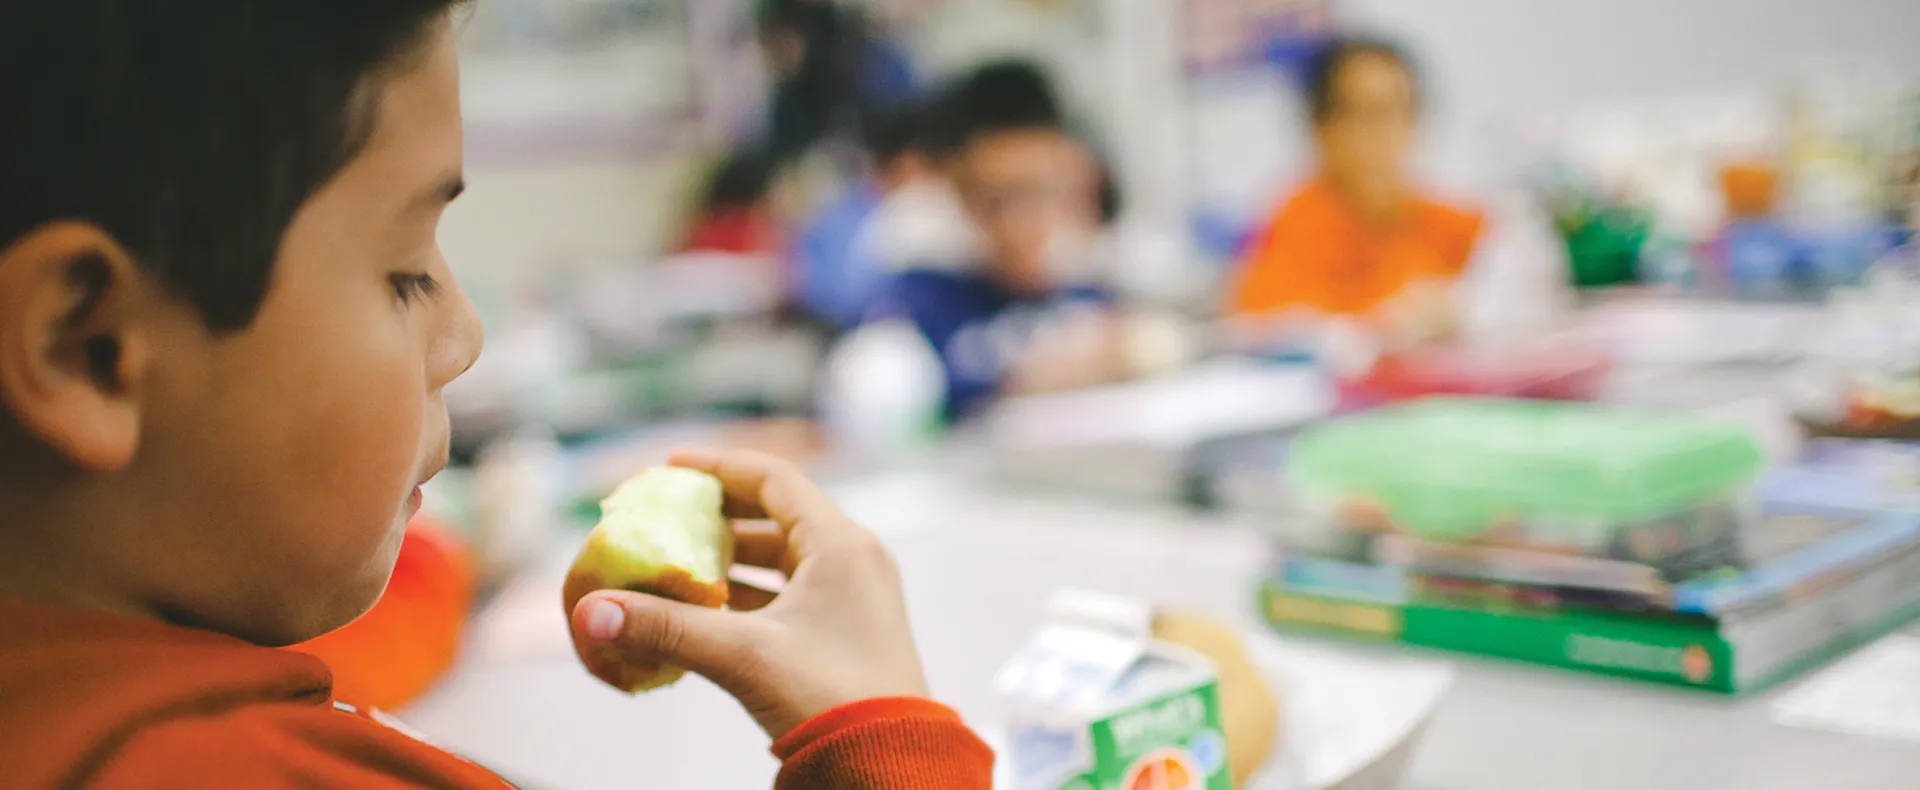 Our Impact: How We Fed 775 Million Kids